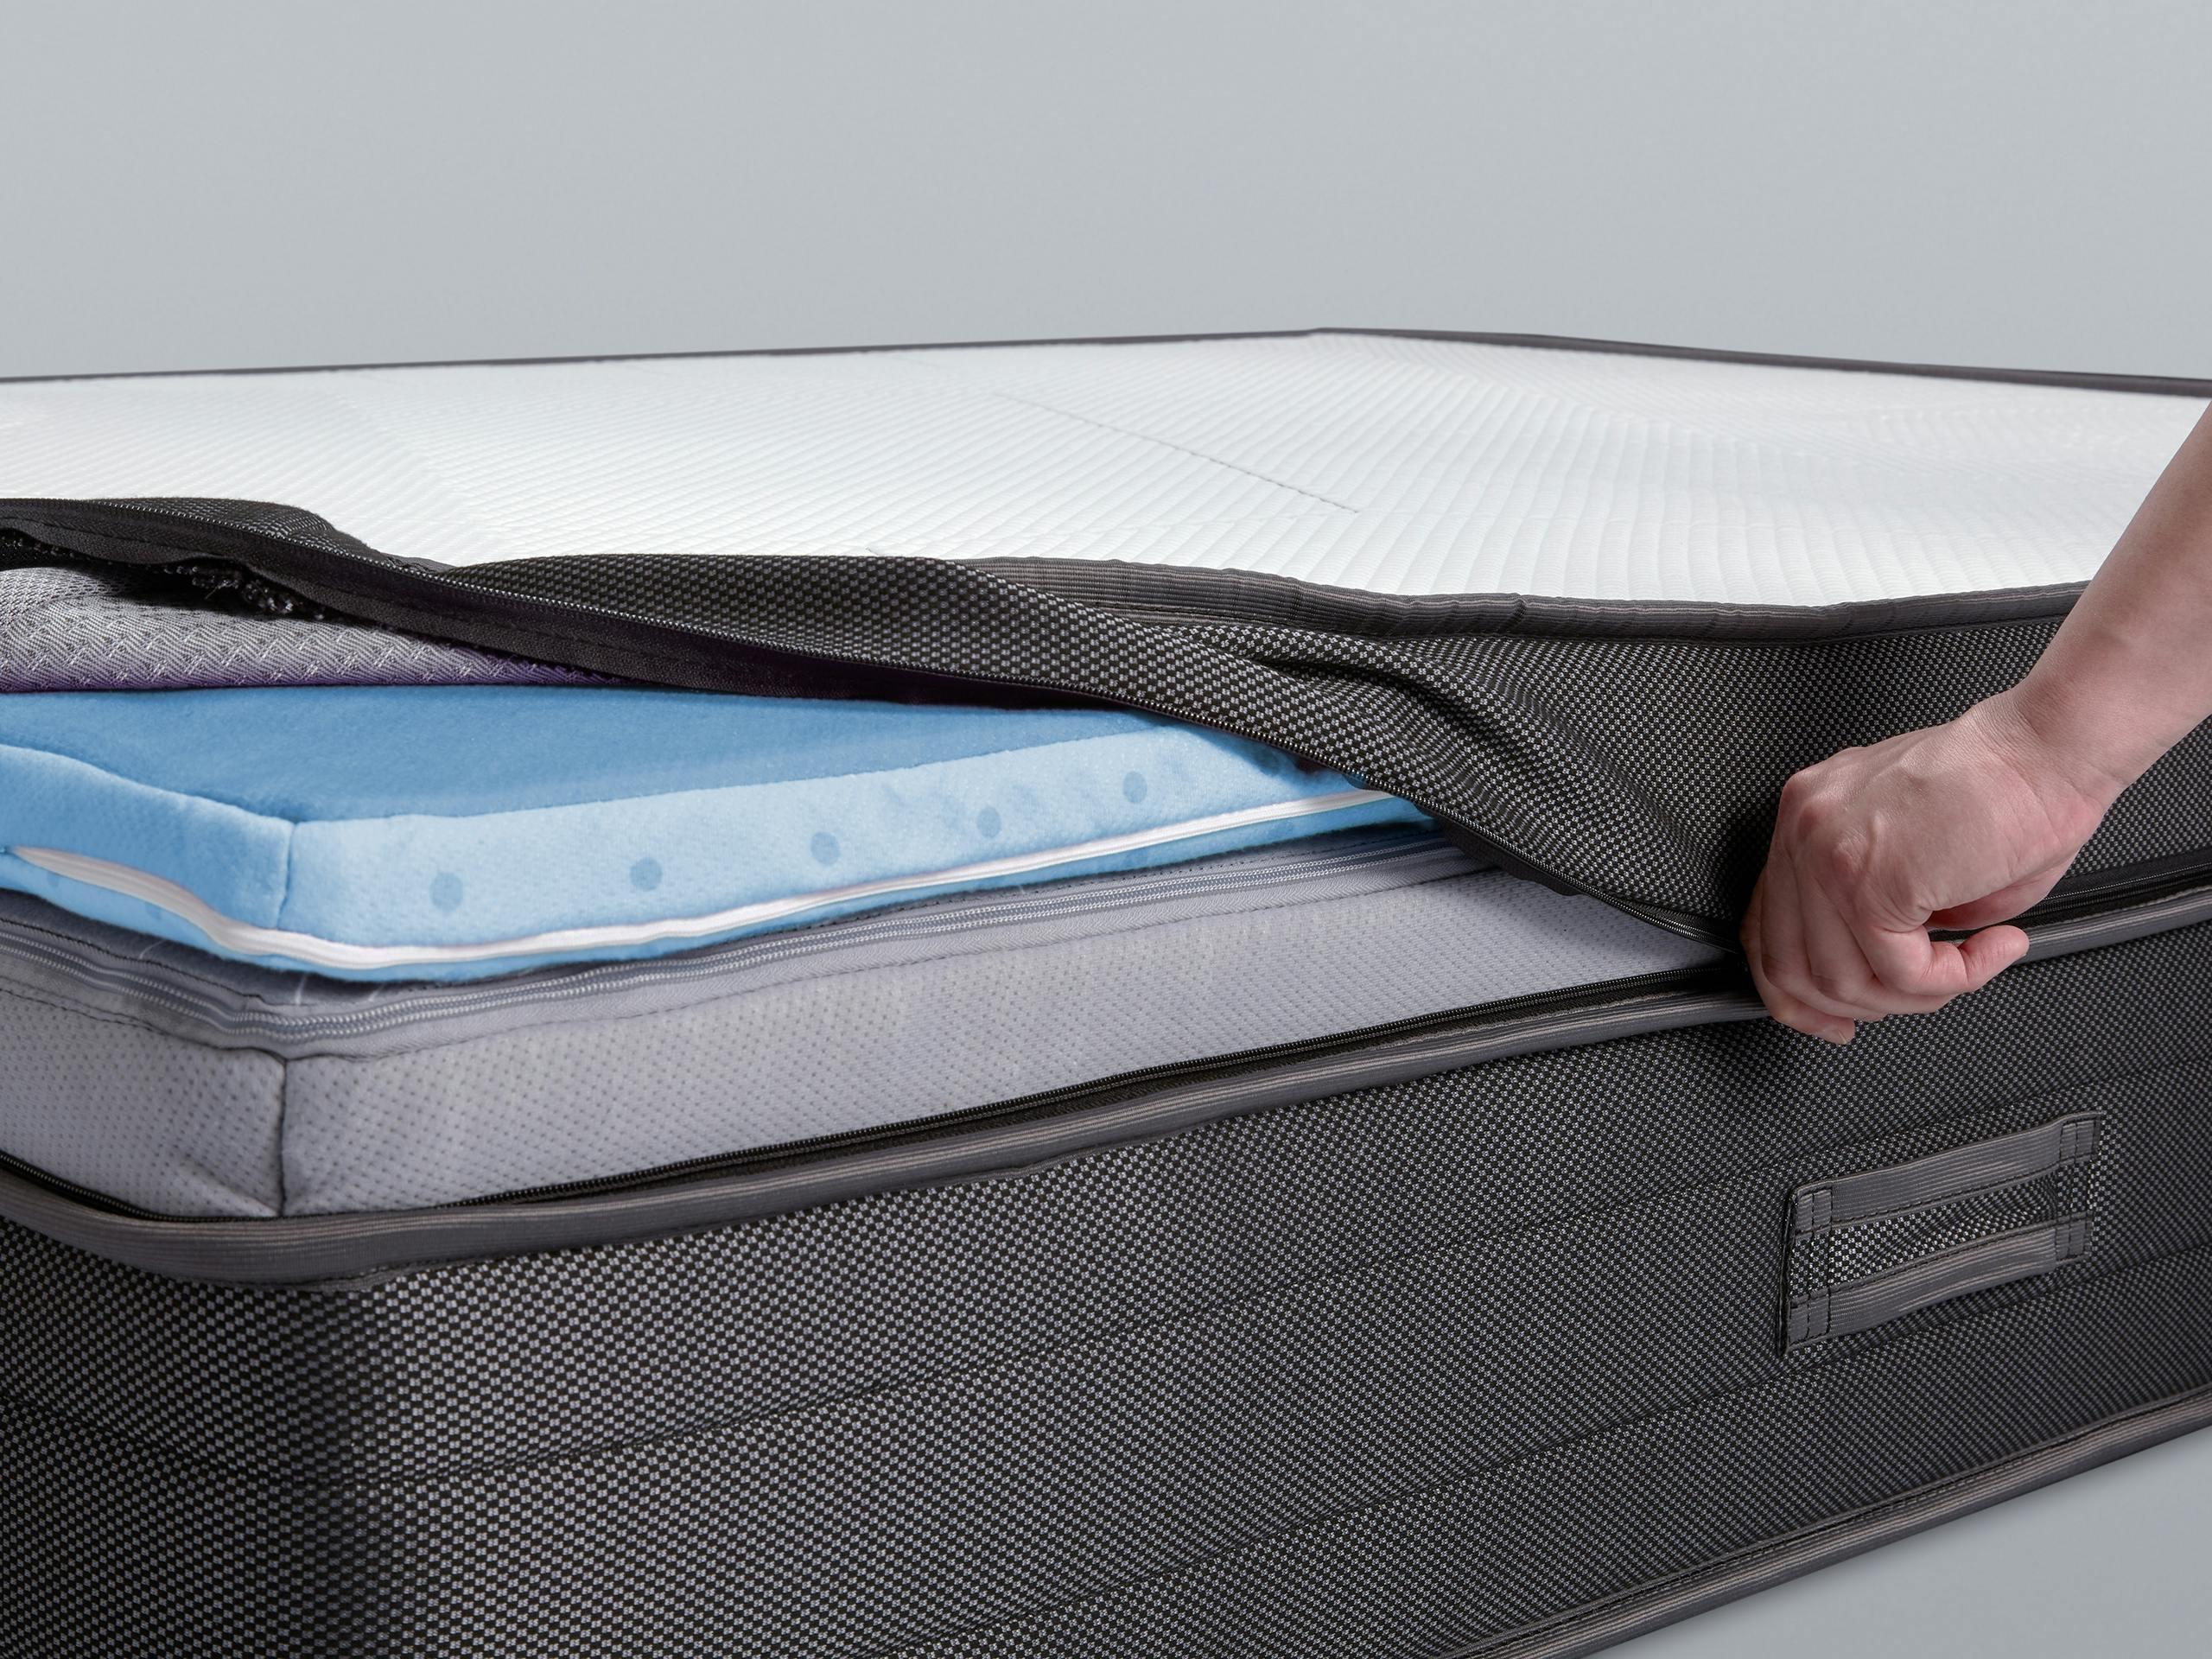 SD Mach 2 Mattress BreatheTech Cover being unzipped, revealing the AntiGravity Surface Foam and ComponentAdapt layers within.